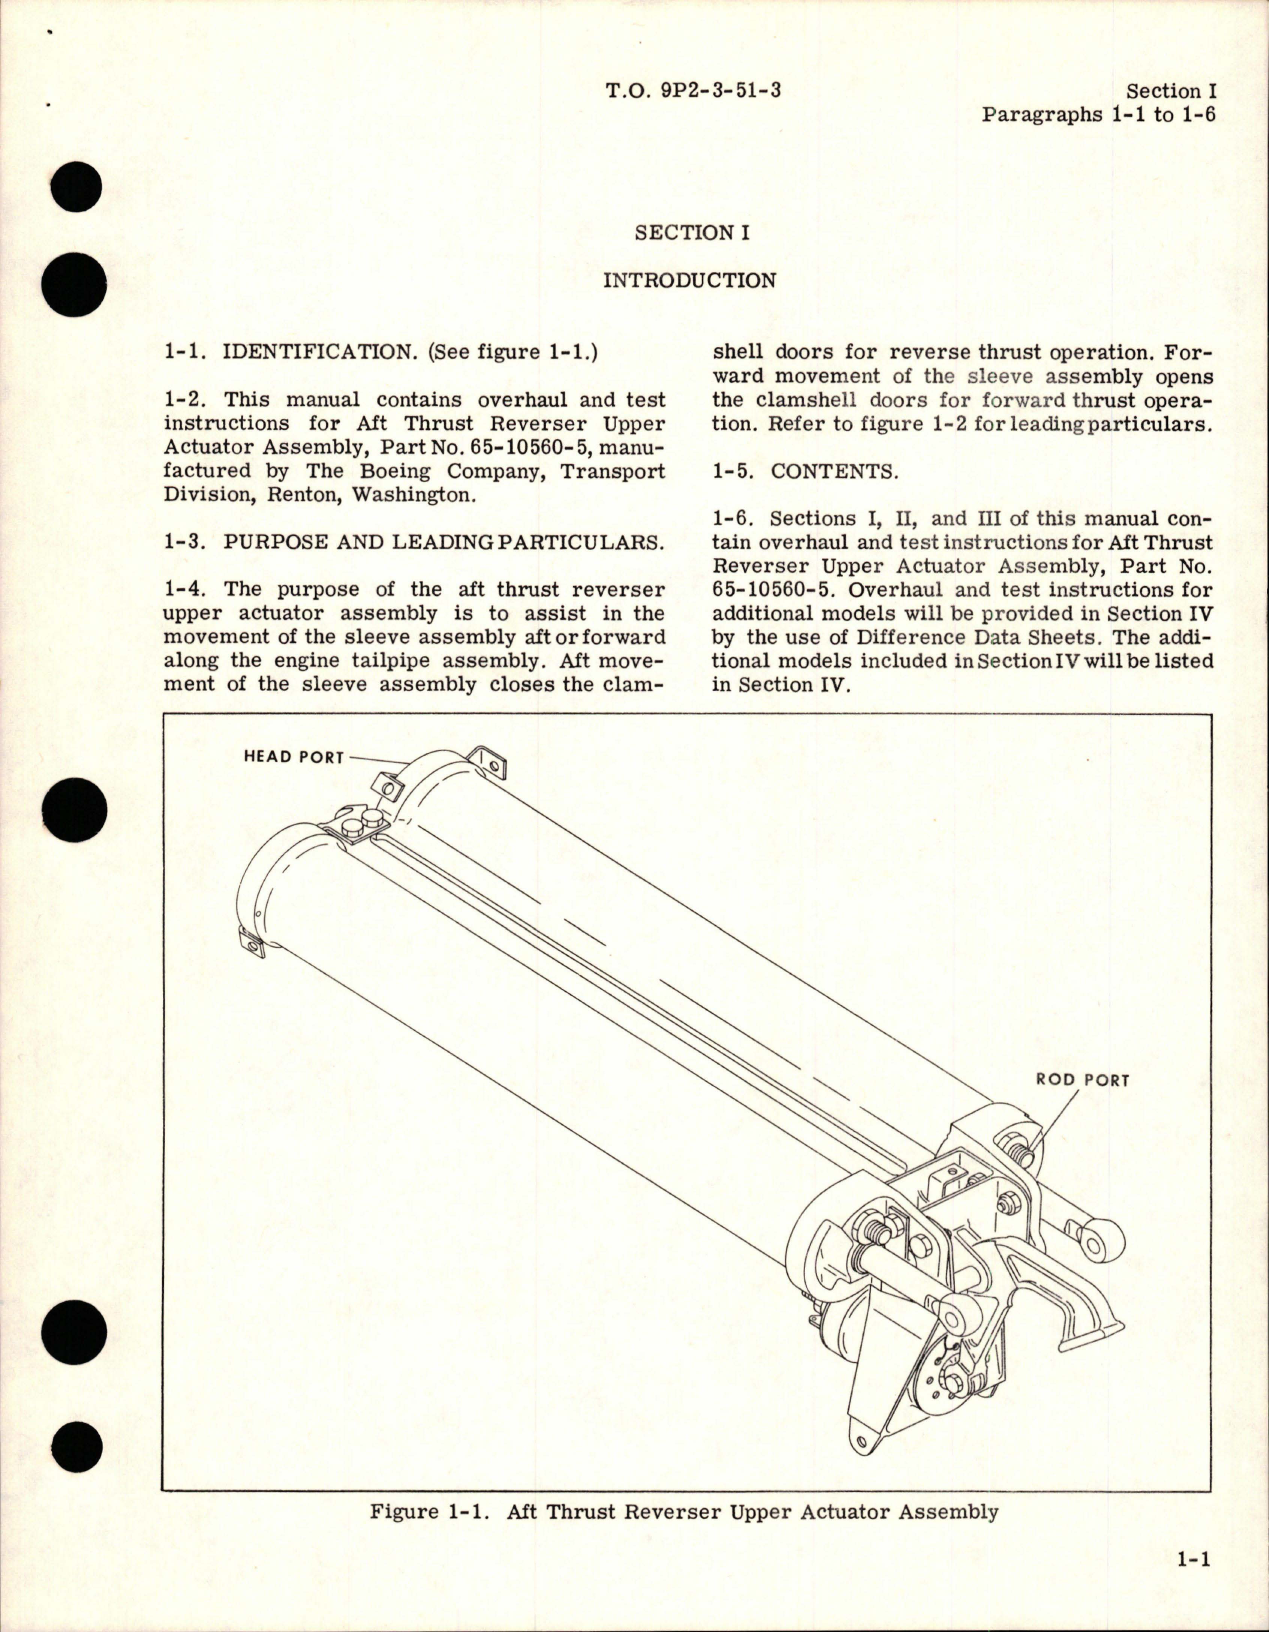 Sample page 5 from AirCorps Library document: Overhaul for AFT Thrust Reverser Upper Actuator Assembly - Part 65-10560-5